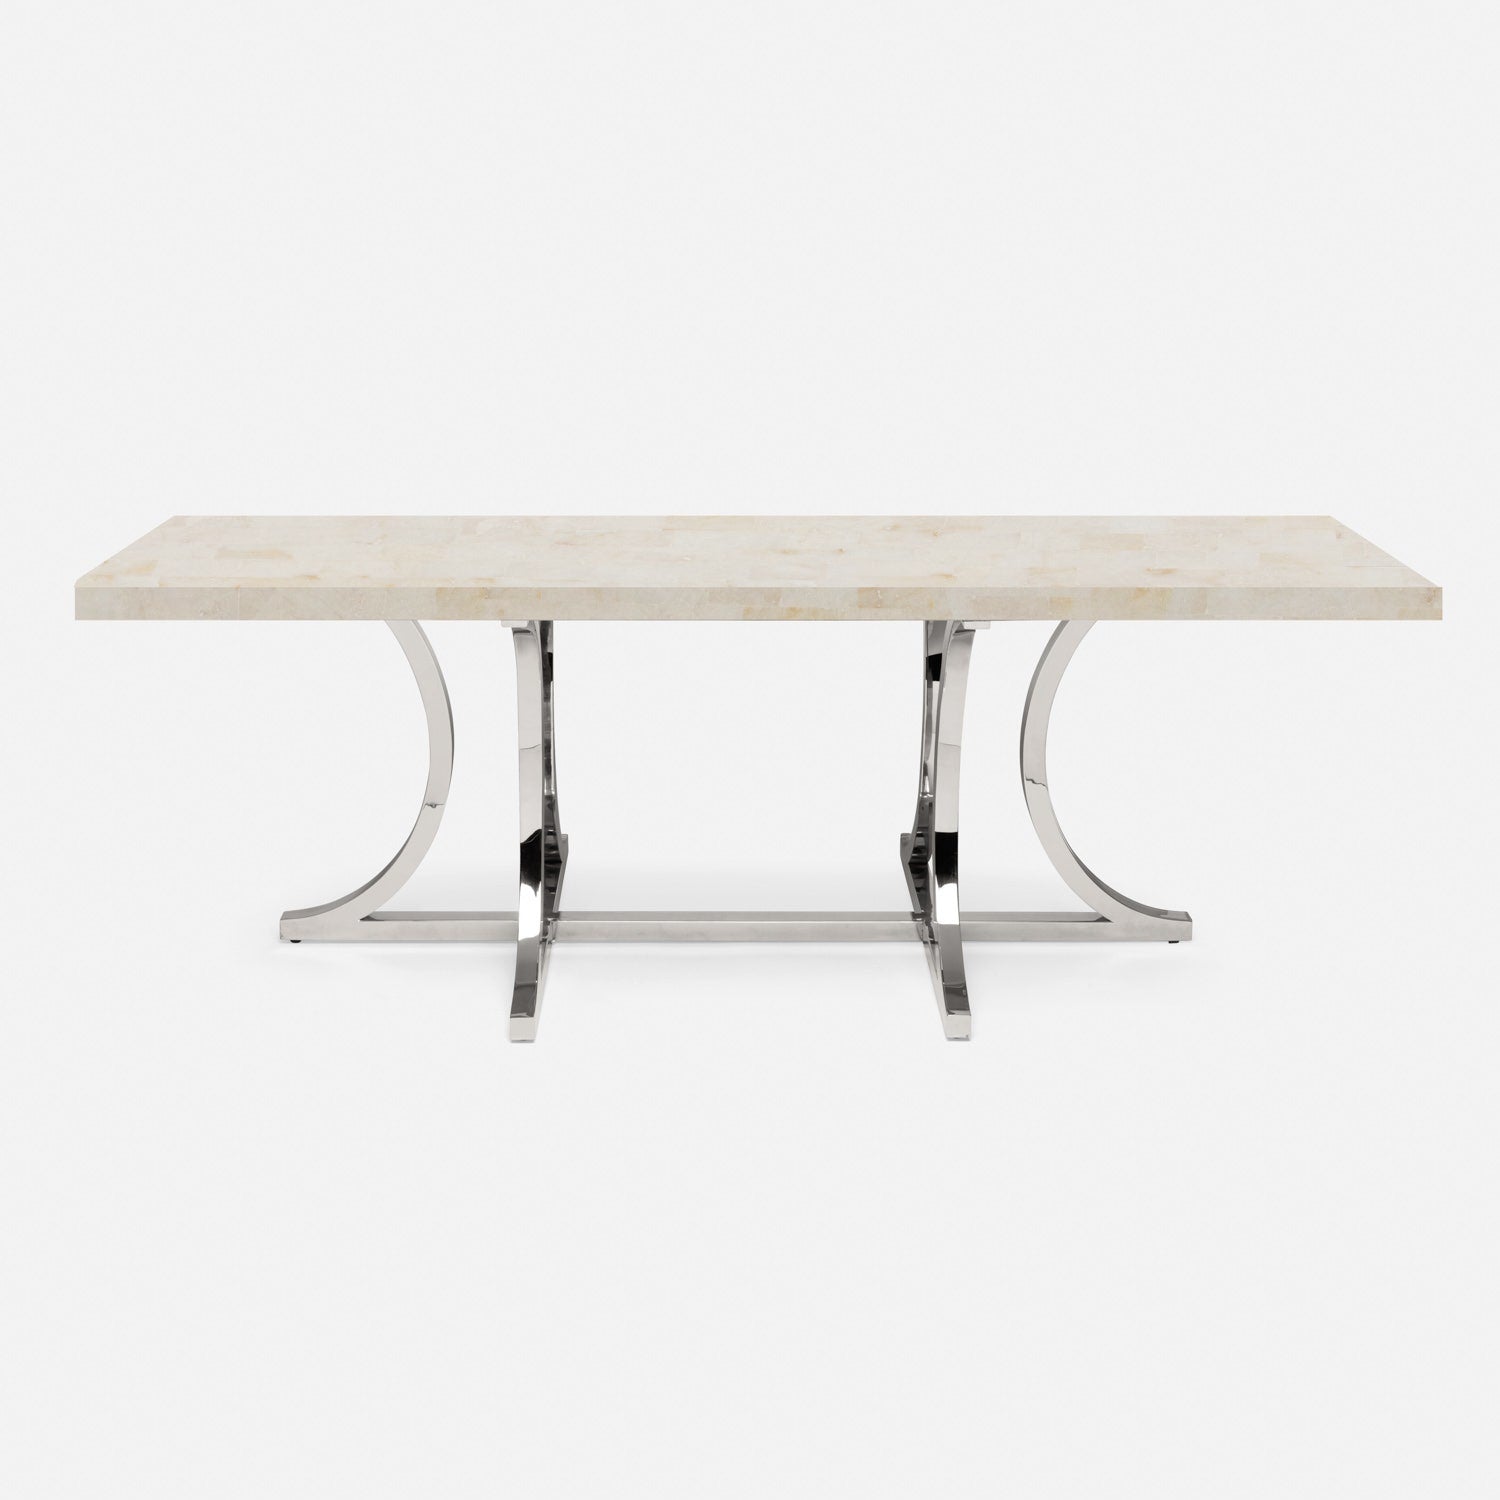 Made Goods Leighton 72" x 40" x 30" Polished Silver Steel Dinning Table With Rectangle Ice Crystal Stone Table Top